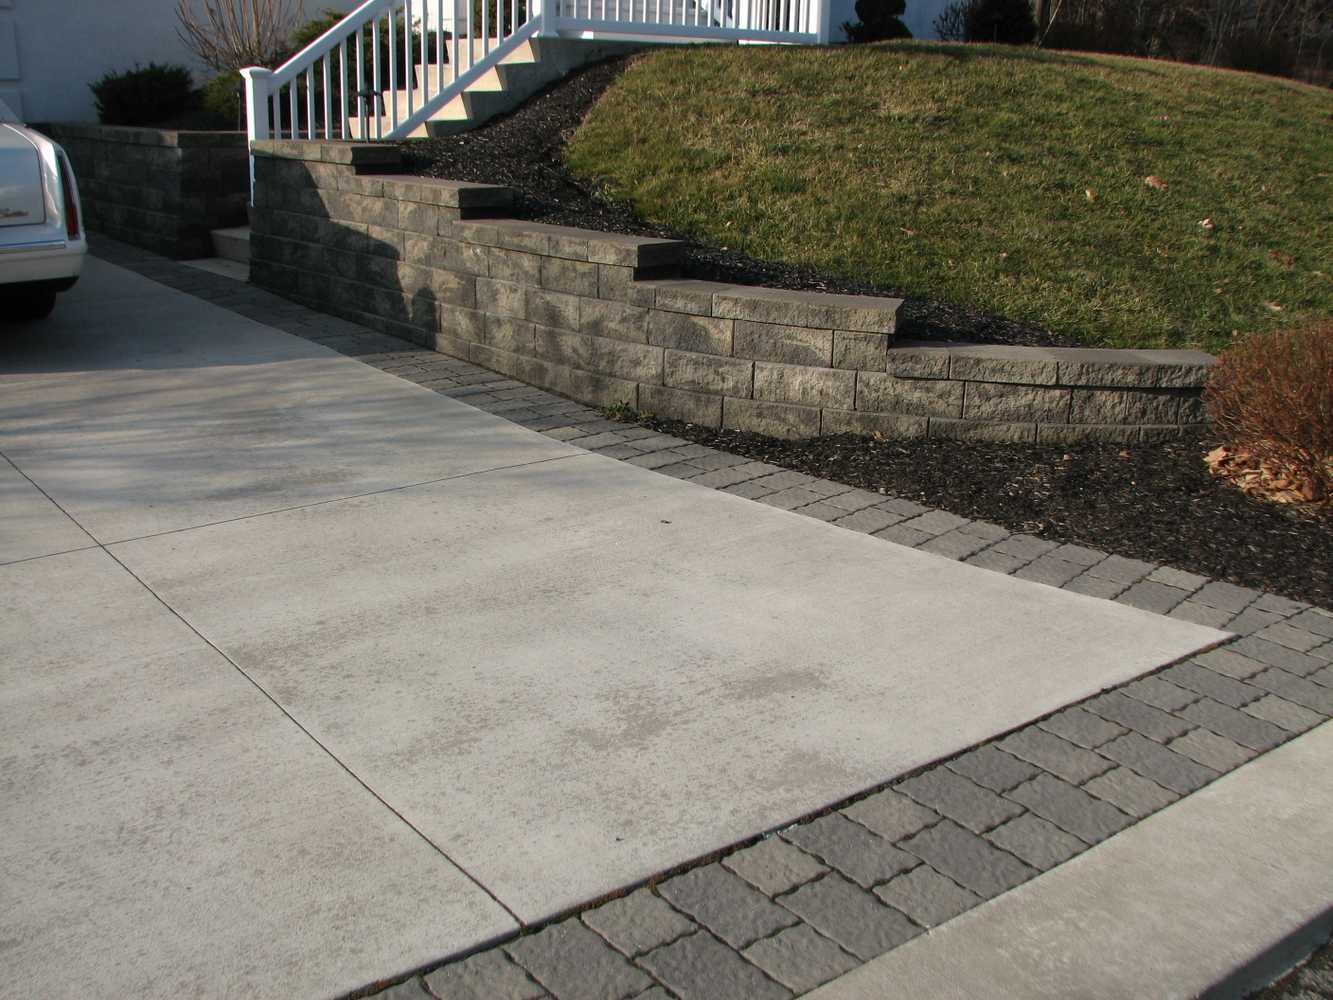 Retaining walls, accented driveways, and raised porches